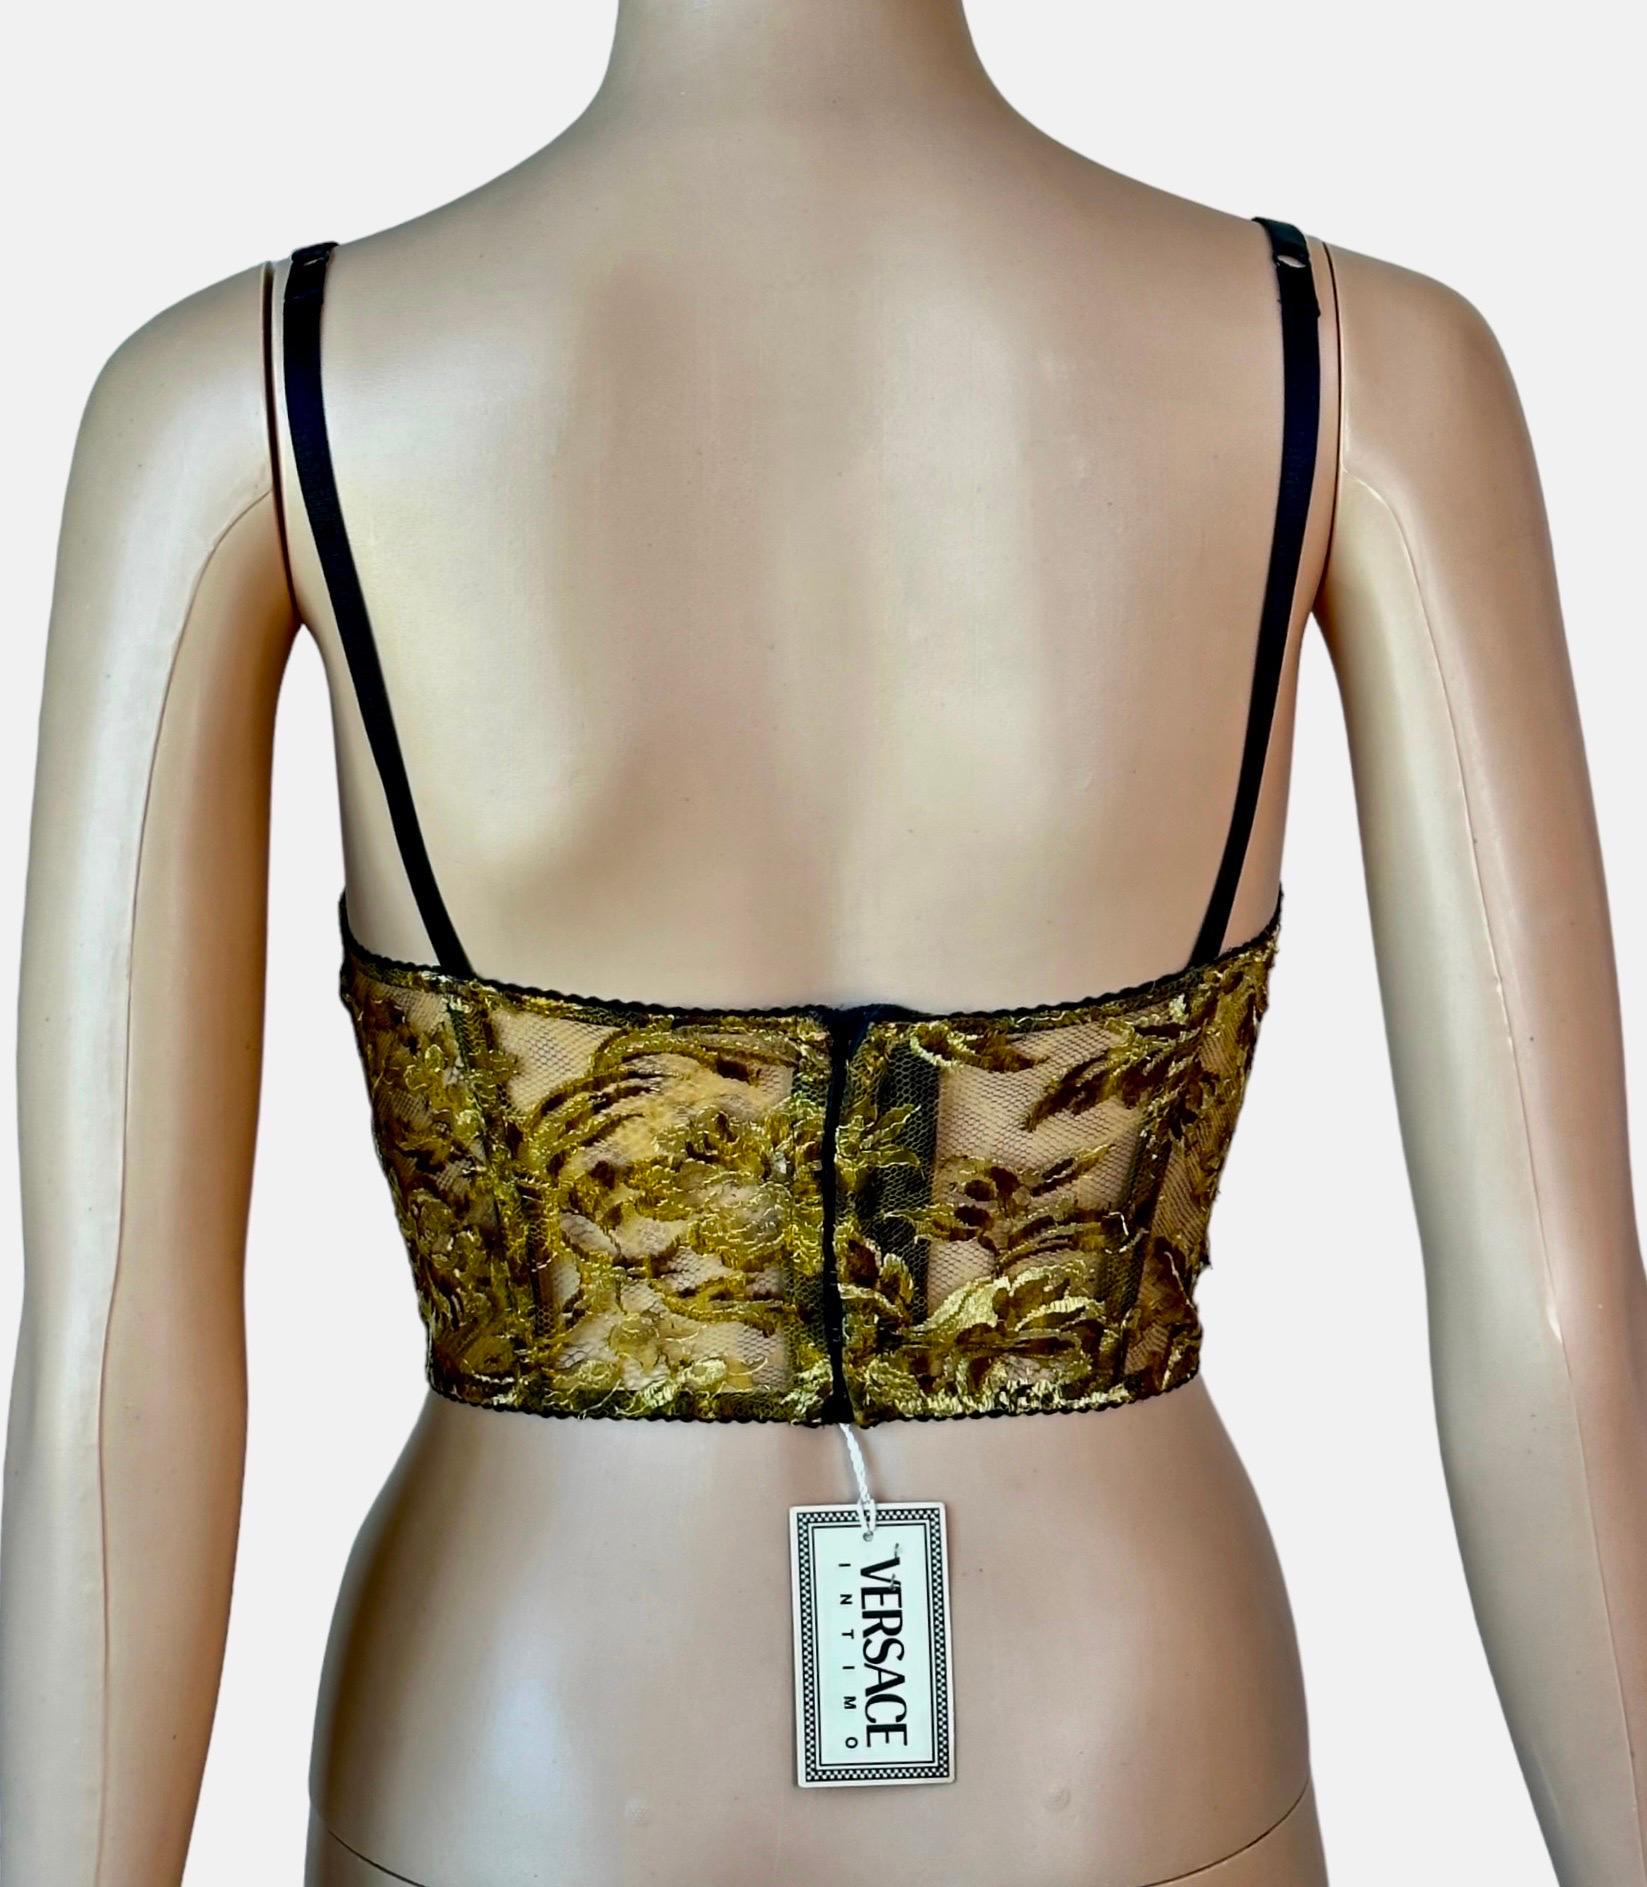 Gianni Versace S/S 1992 Unworn Sheer Gold Embroidered Lace Bustier Bra Crop Top  For Sale 1